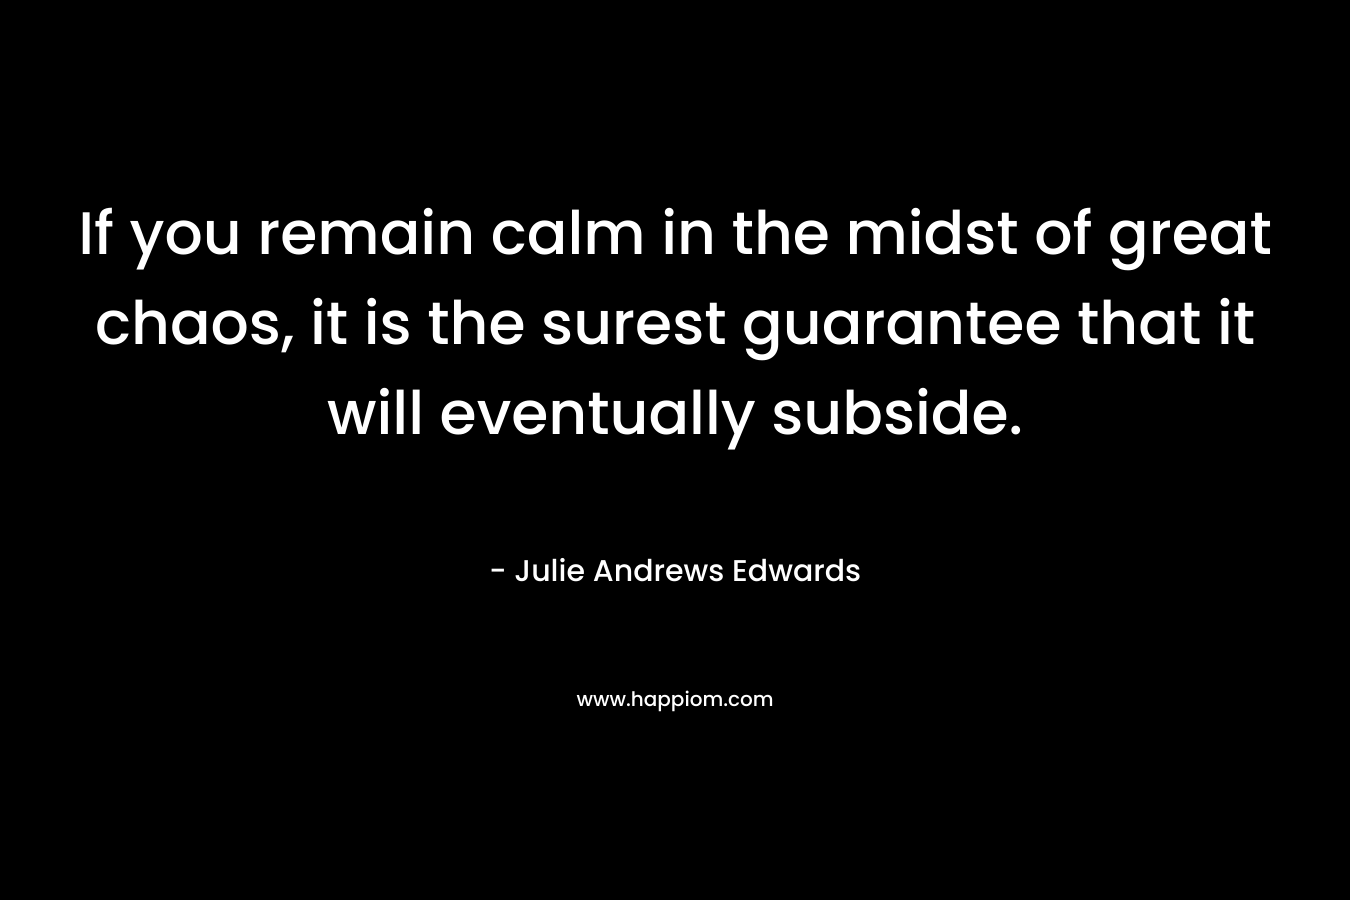 If you remain calm in the midst of great chaos, it is the surest guarantee that it will eventually subside.